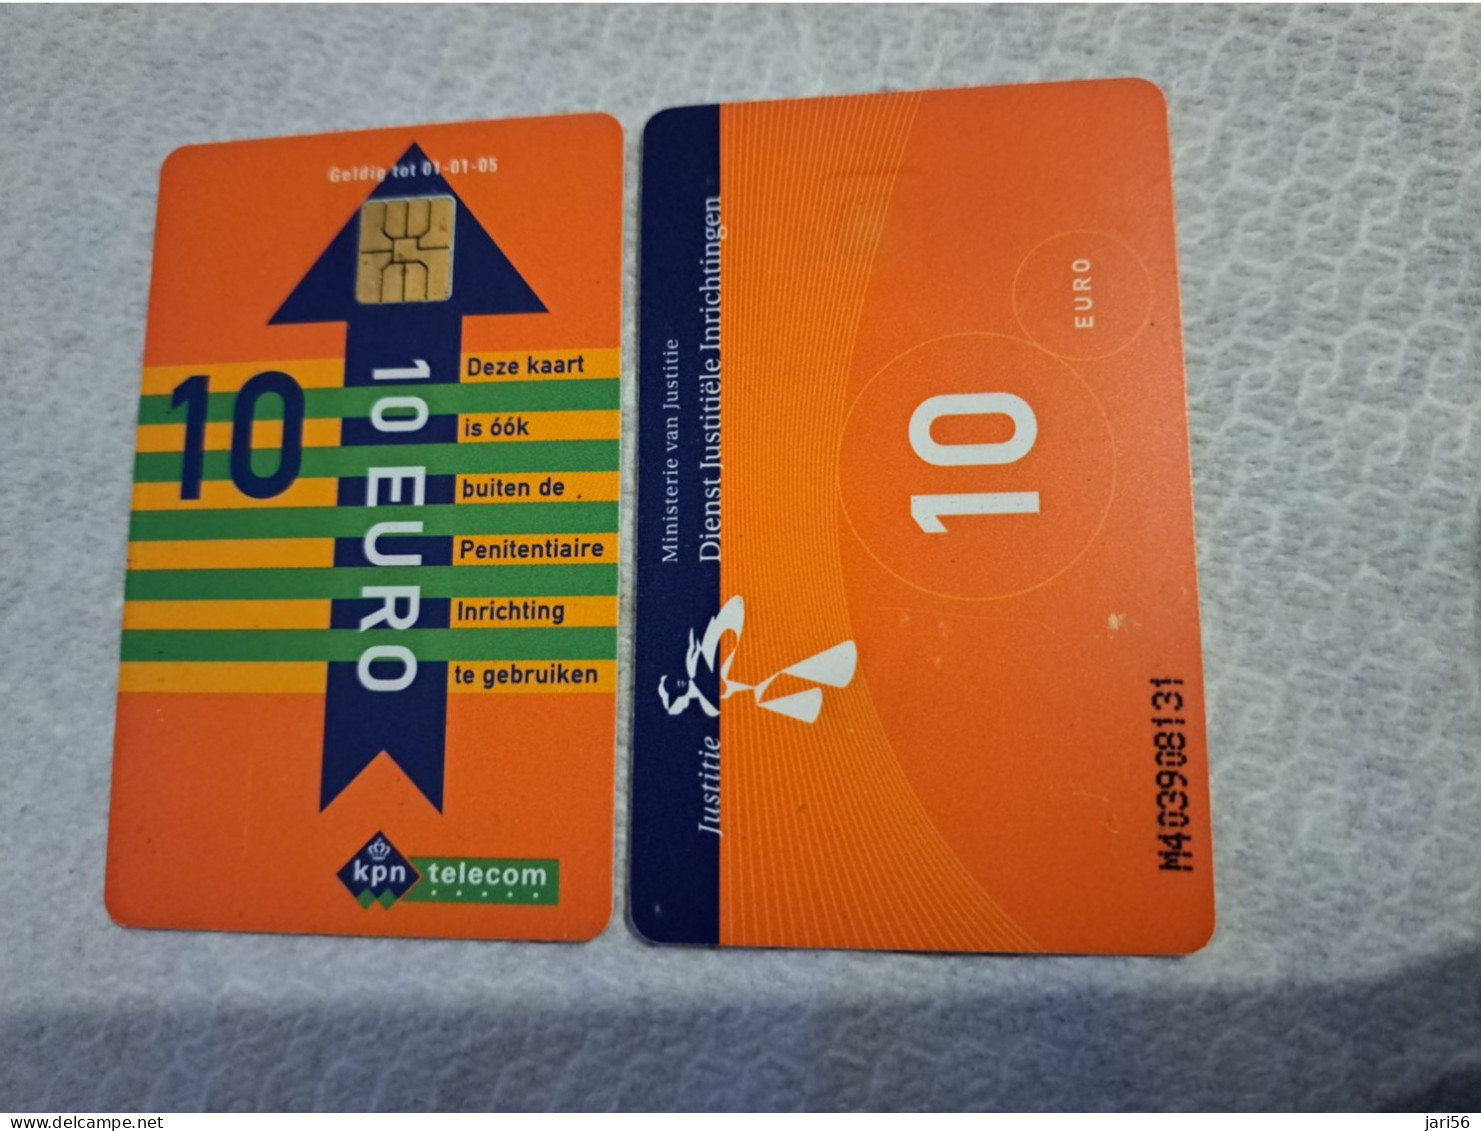 NETHERLANDS   € 10,-   / USED  / DATE  01-01-05  JUSTITIE/PRISON CARD  CHIP CARD/ USED   ** 16160** - [3] Sim Cards, Prepaid & Refills